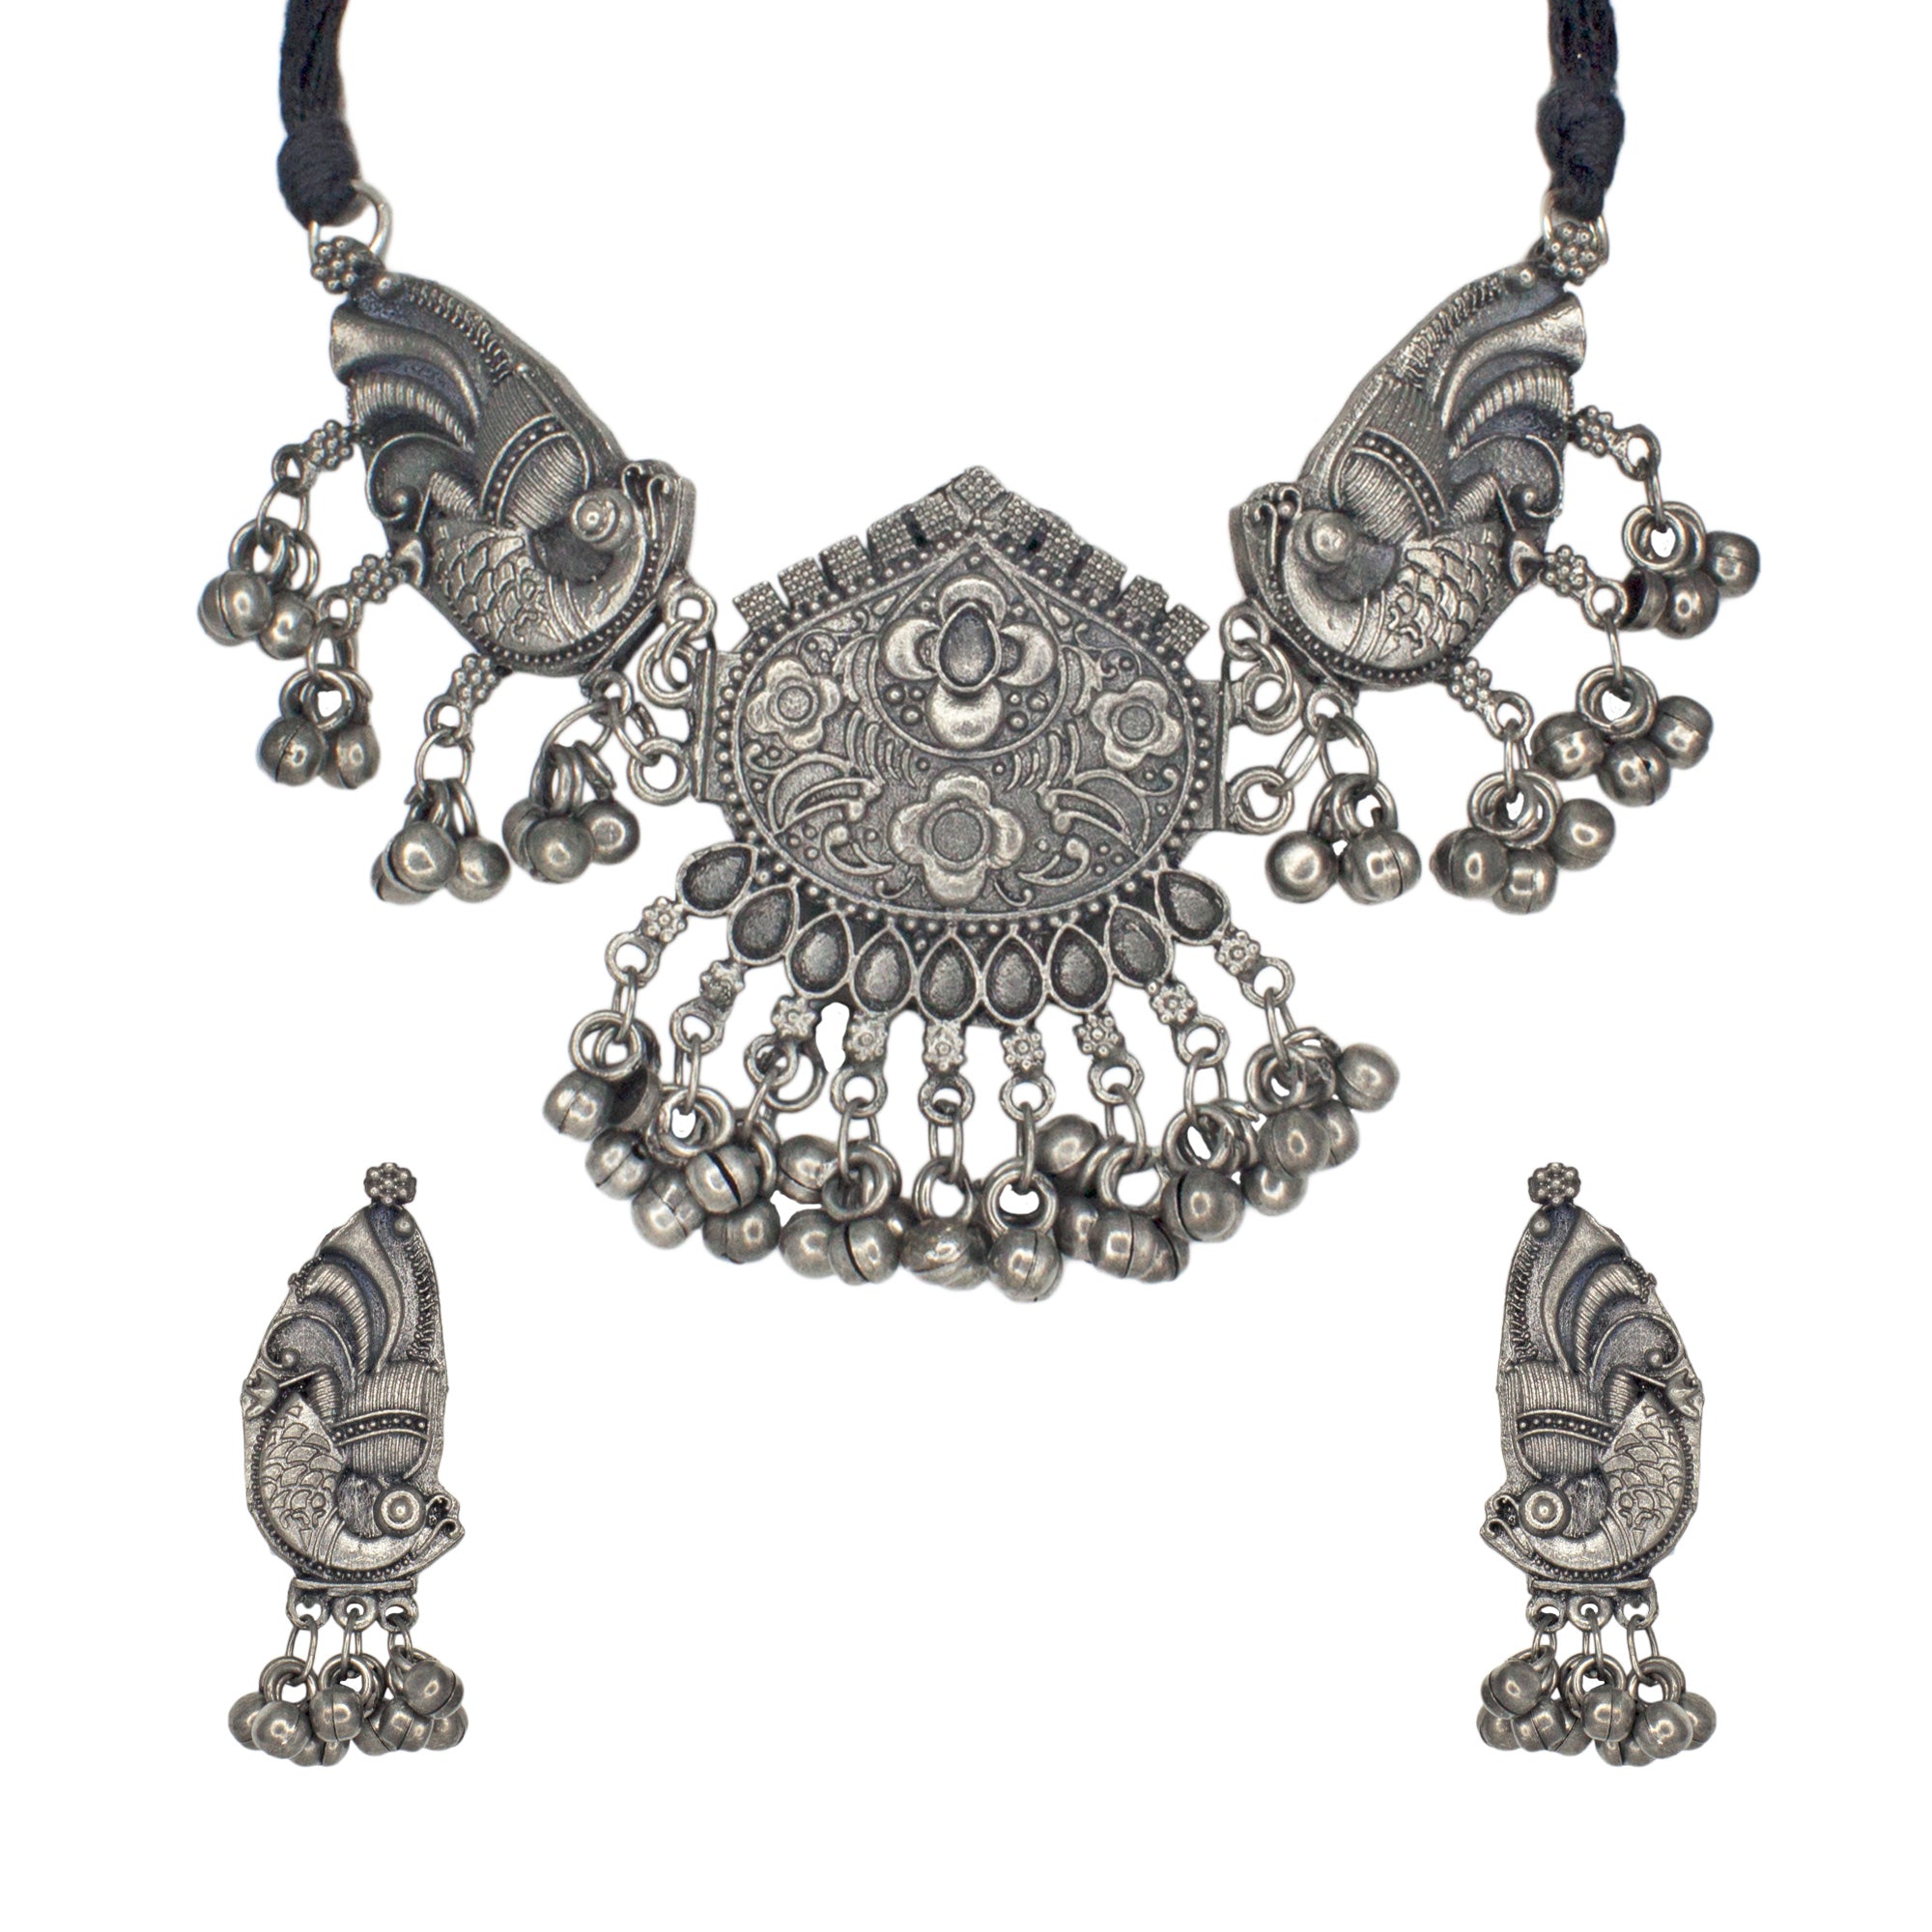 Abhinn Stylish Black Polished Floral And Peacock Design Mirror Choker Set For Women